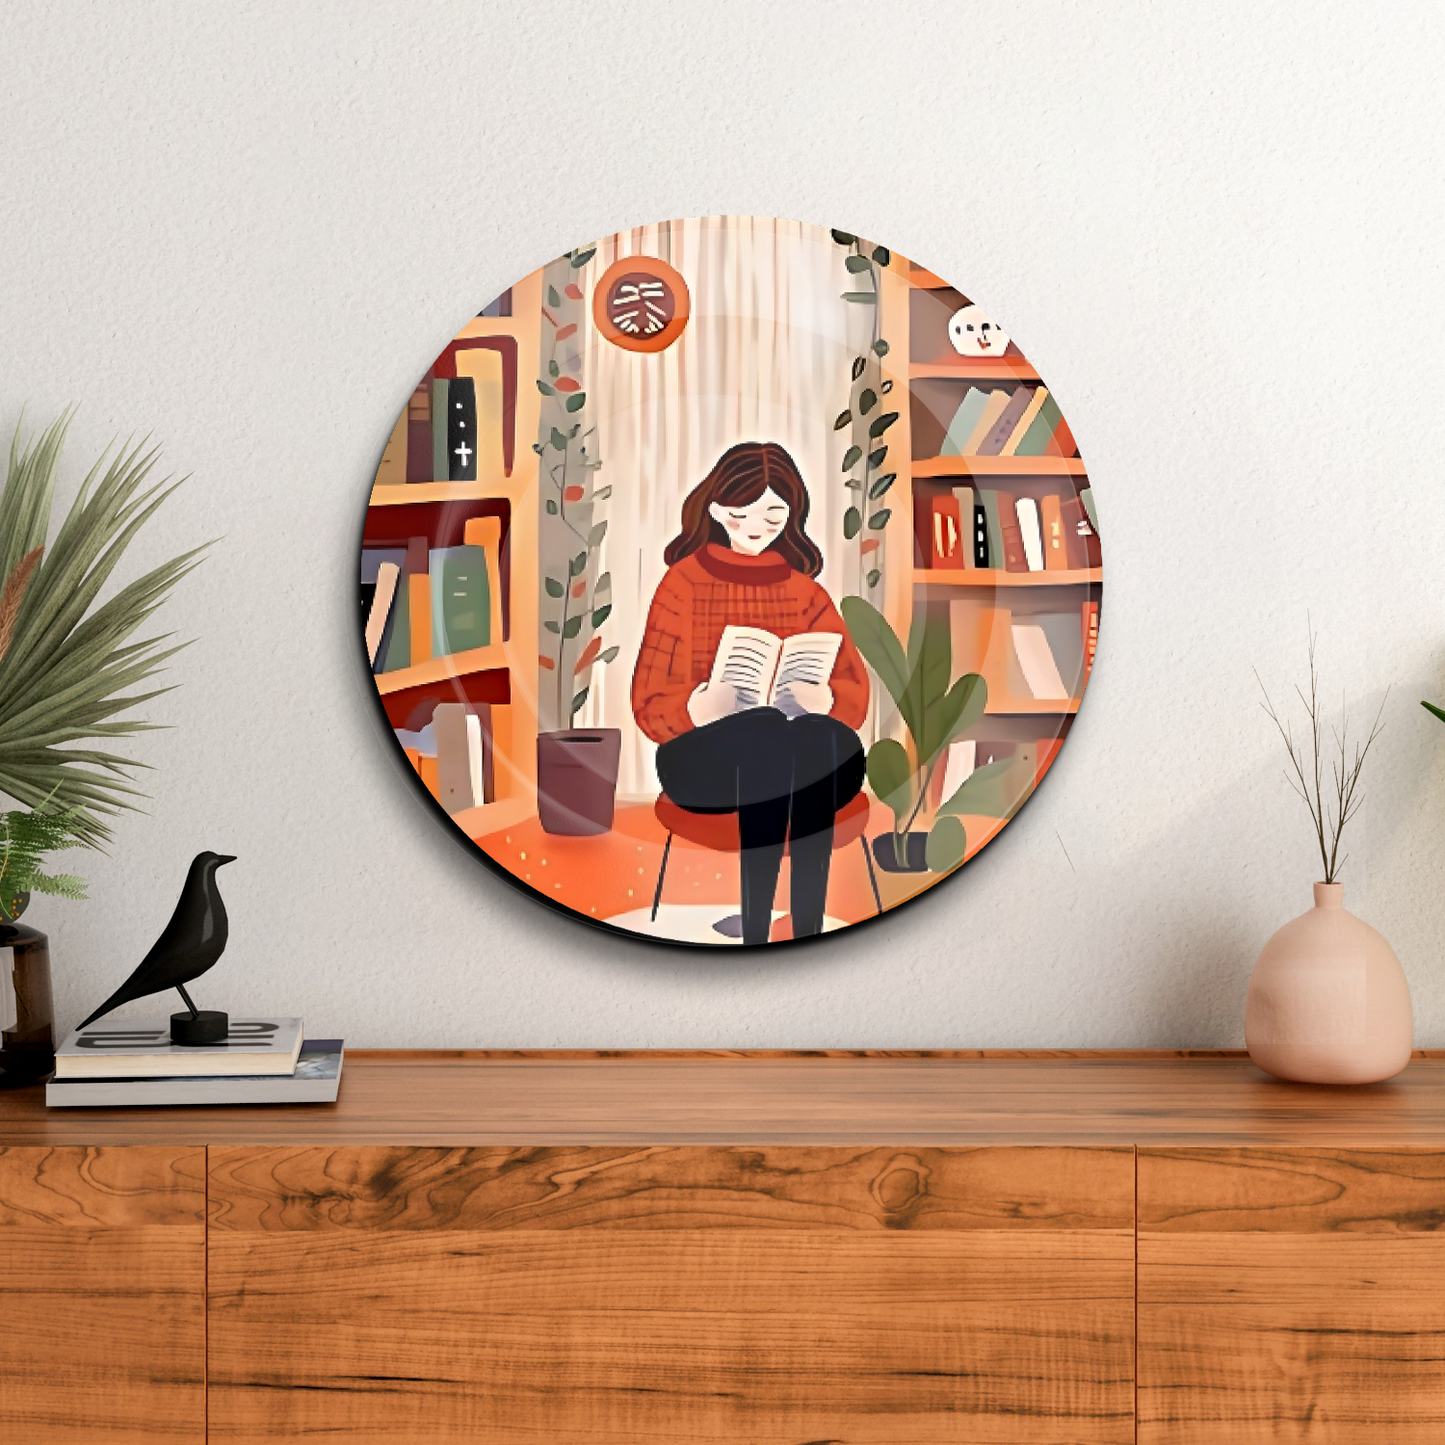 Home Library decorative wall plates